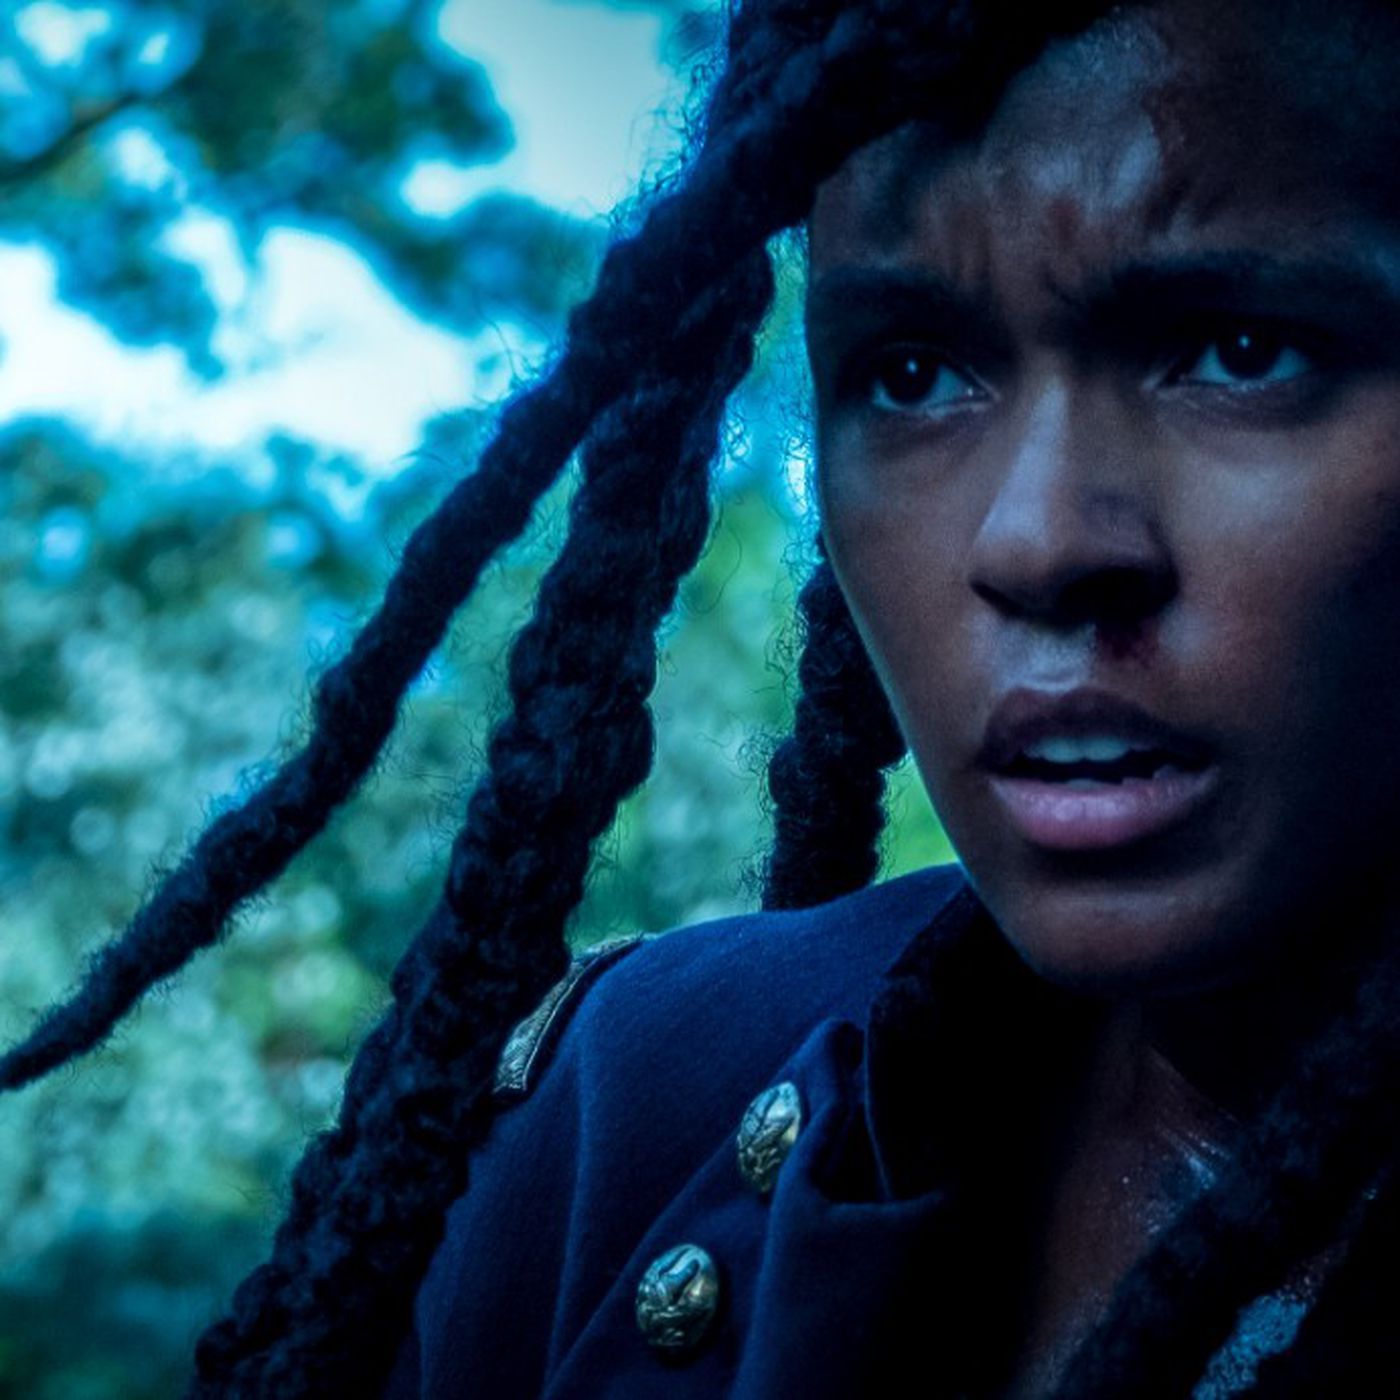 Antebellum review: the Janelle Monáe horror movie is one of 2020's worst